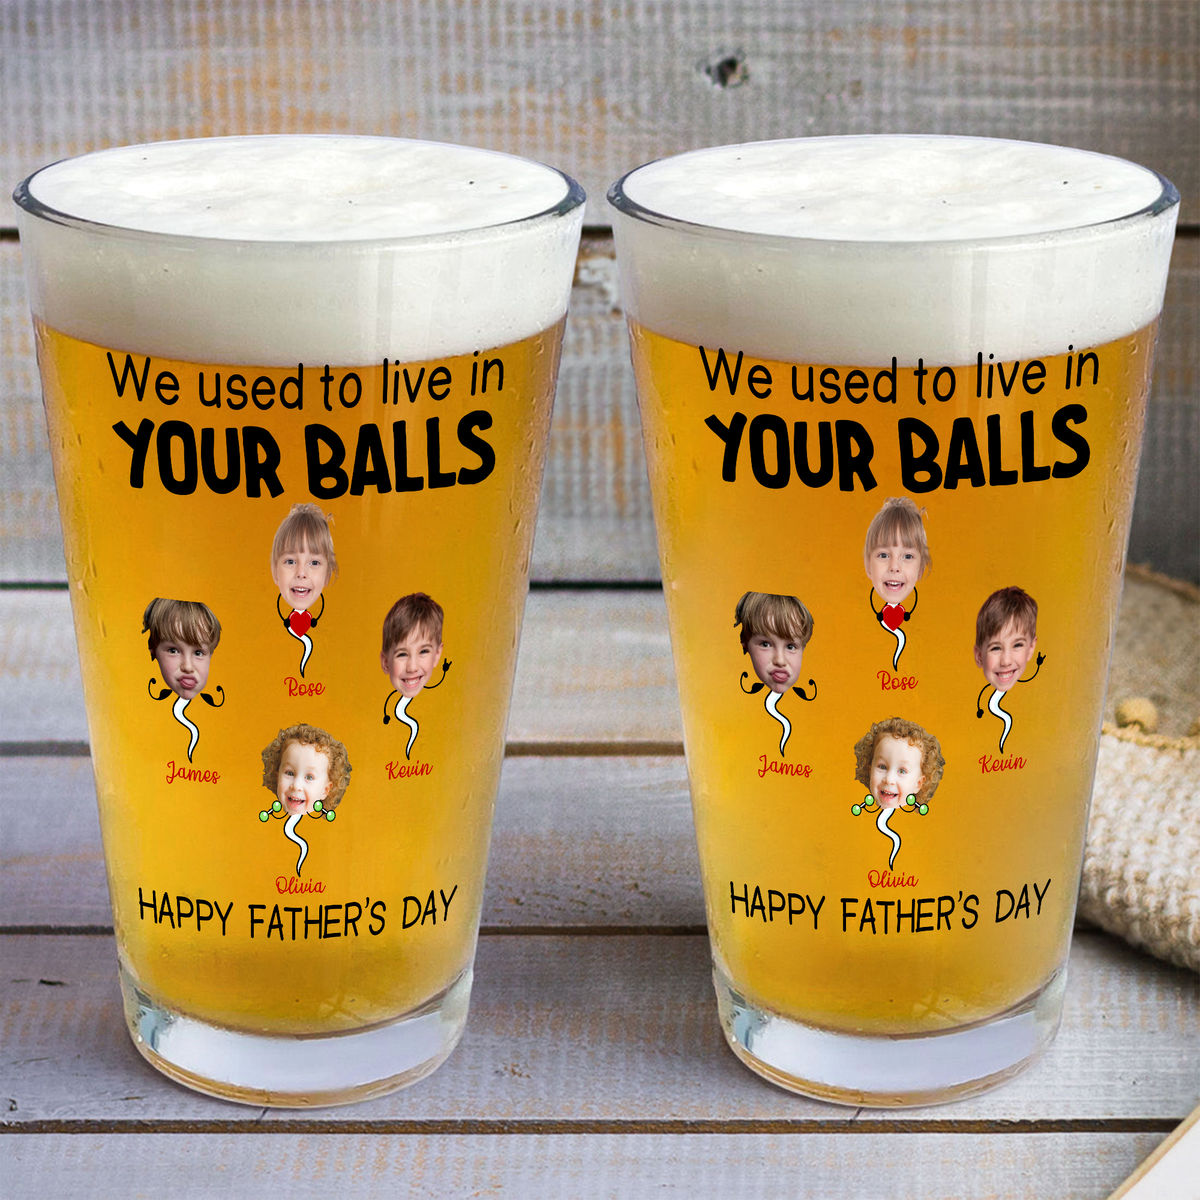 Photo Beer Glass - We used to lived in your balls. Happy Father's Day - Upto 5 Childrens - Father's Day Gift, Gift For Dad, Grandpa - Personalized Photo Beer Glass_3